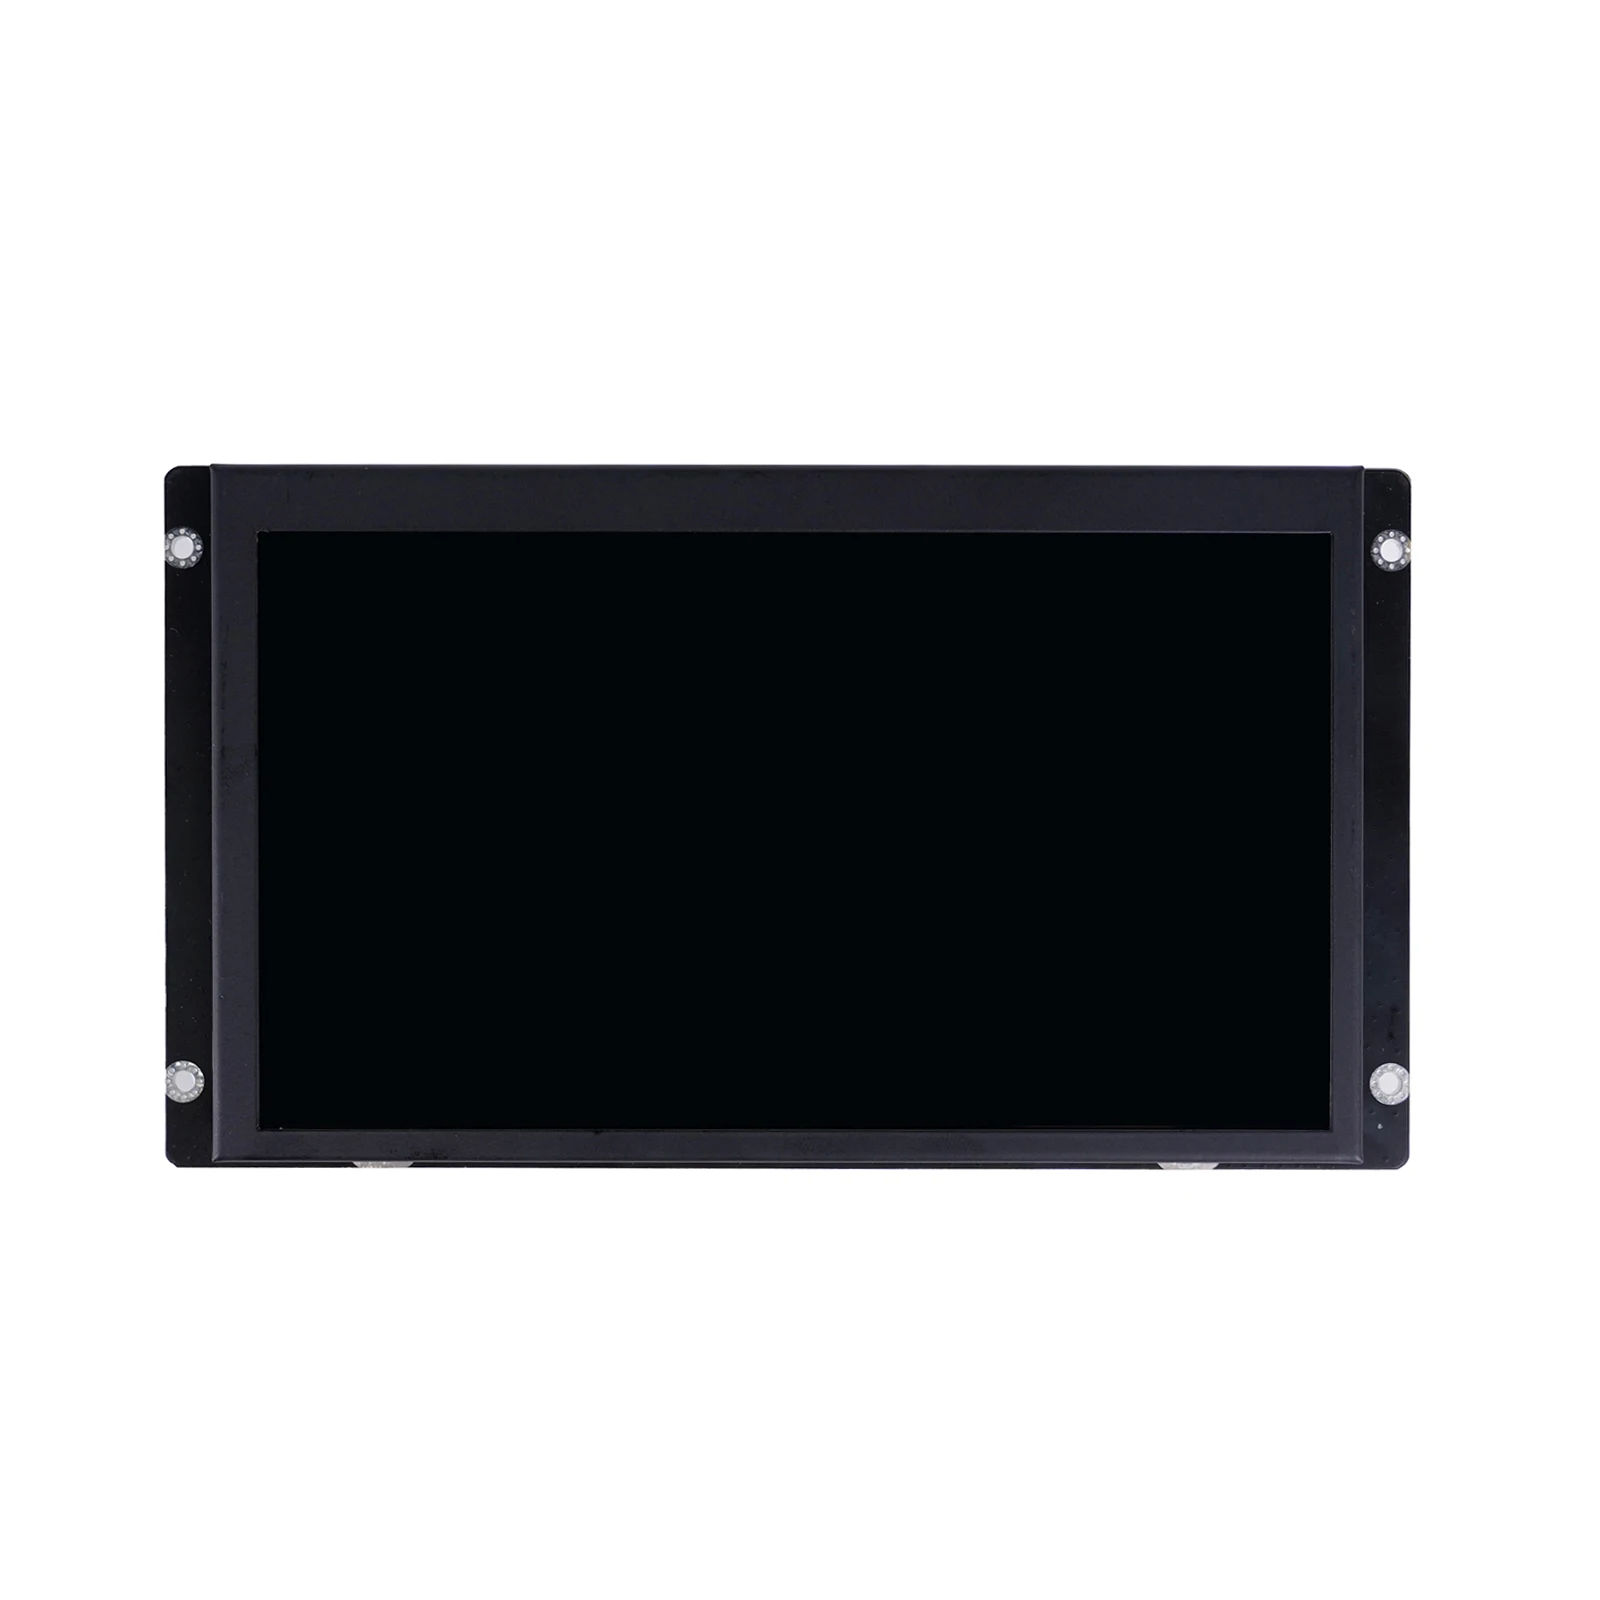 Embedded Mount Android Hmi Lcd Monitor 1gb 8gb Without Gps For Industrial Monitor And Android 8859